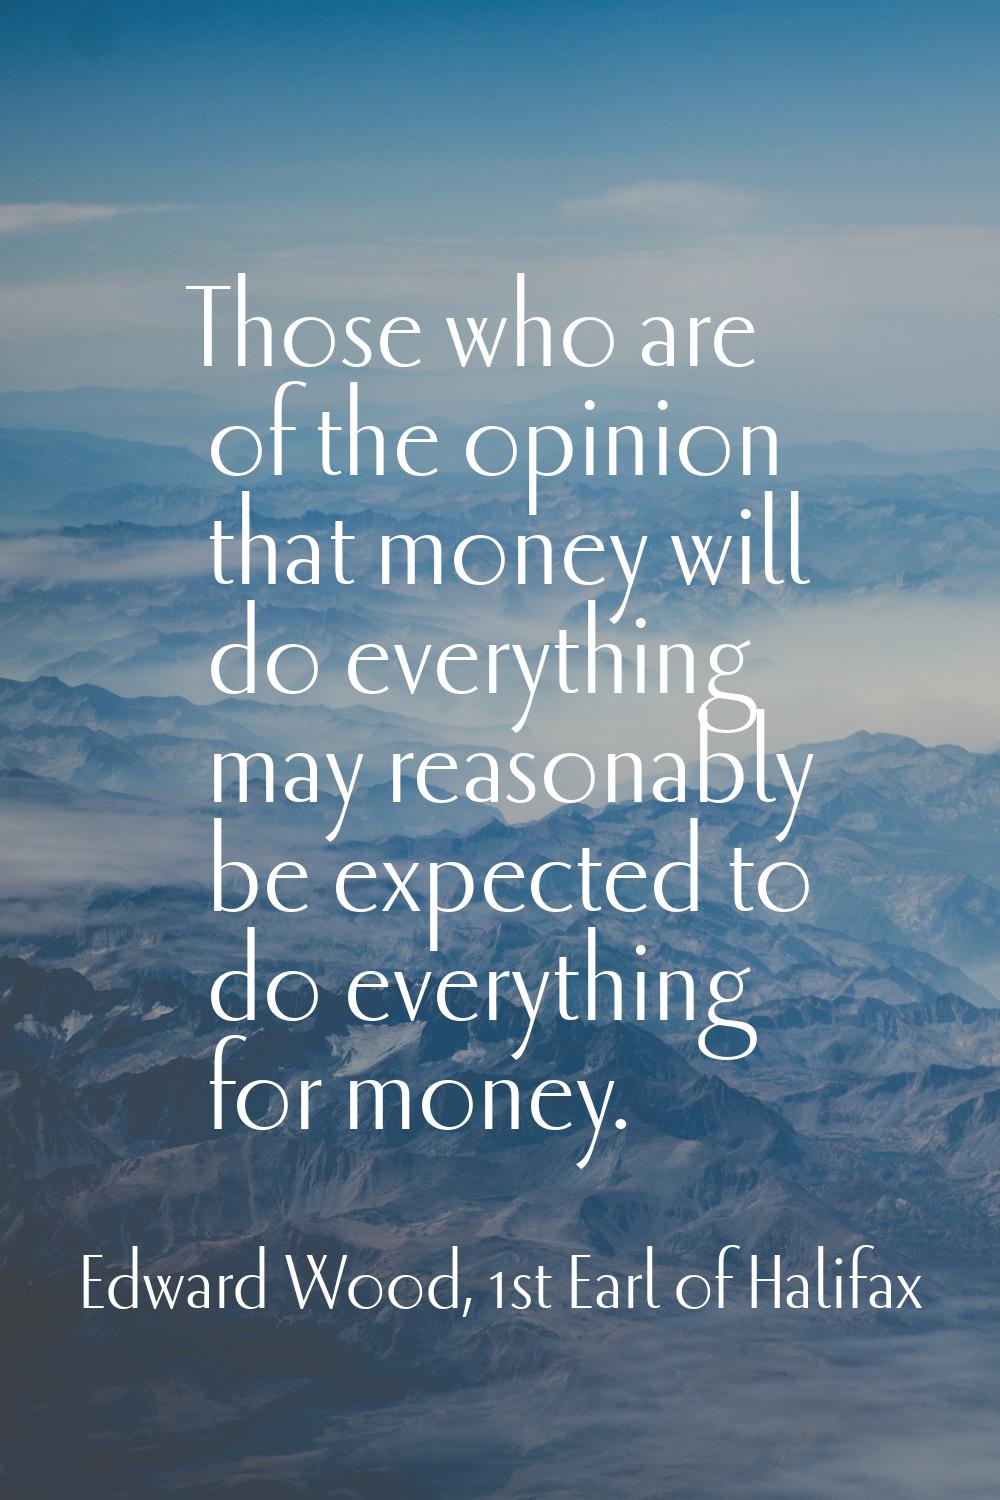 Those who are of the opinion that money will do everything may reasonably be expected to do everyth